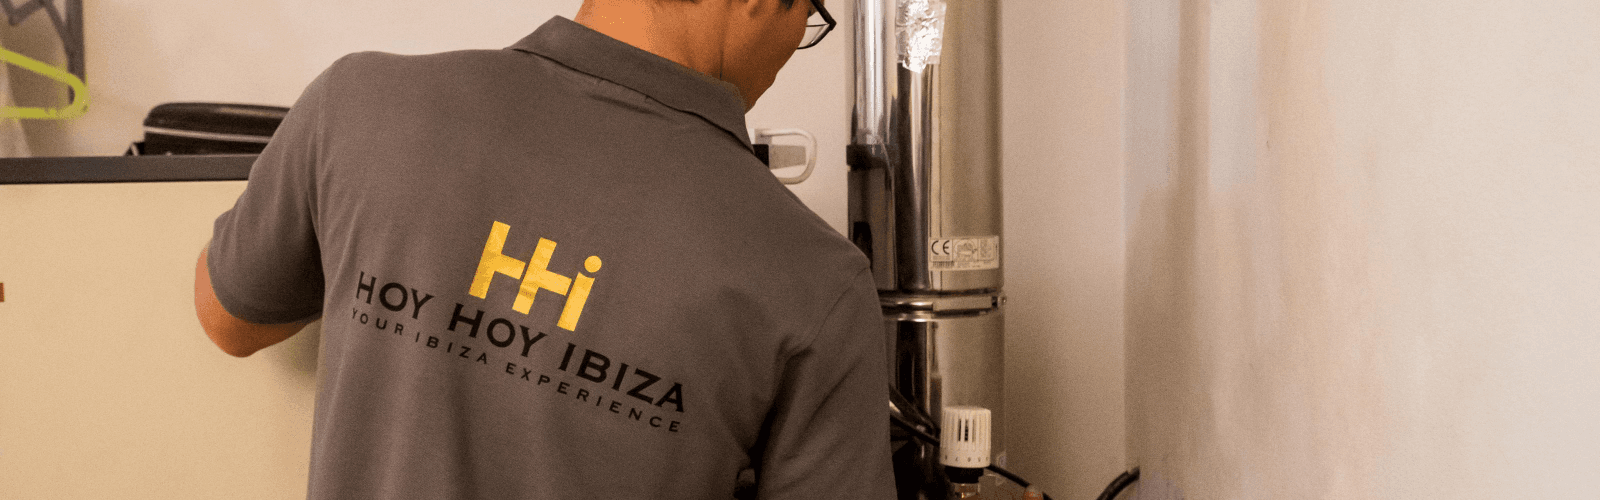 central heating systems ibiza